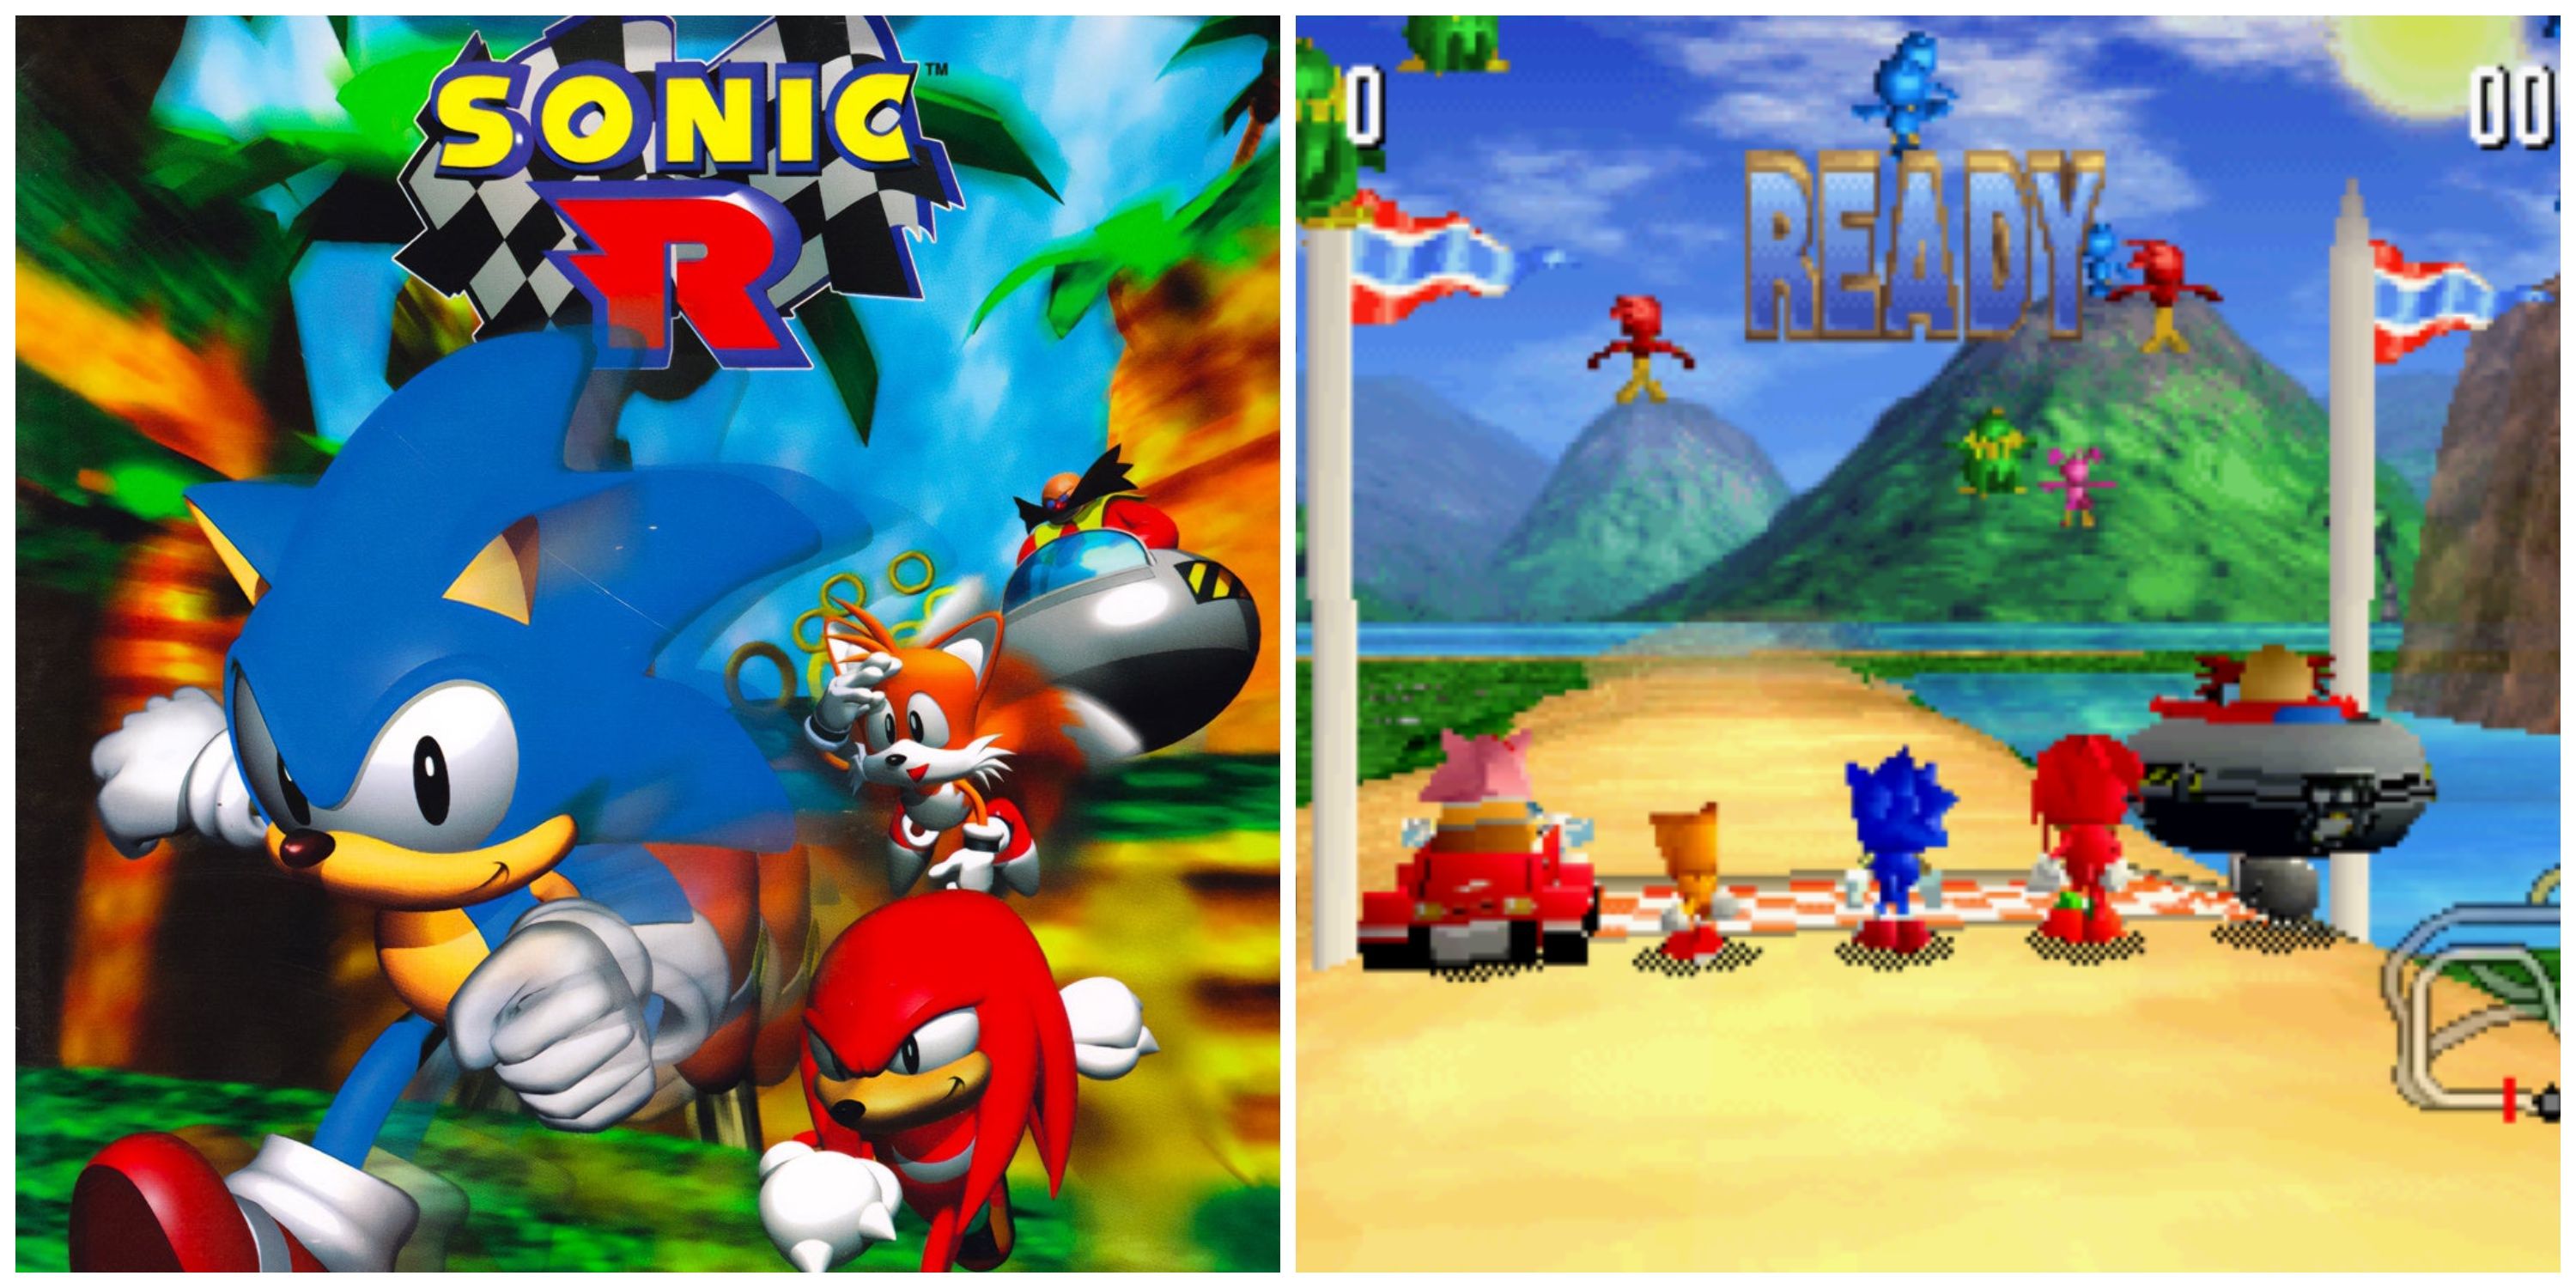 Sonic R cover art, and the race starting on Resort island course